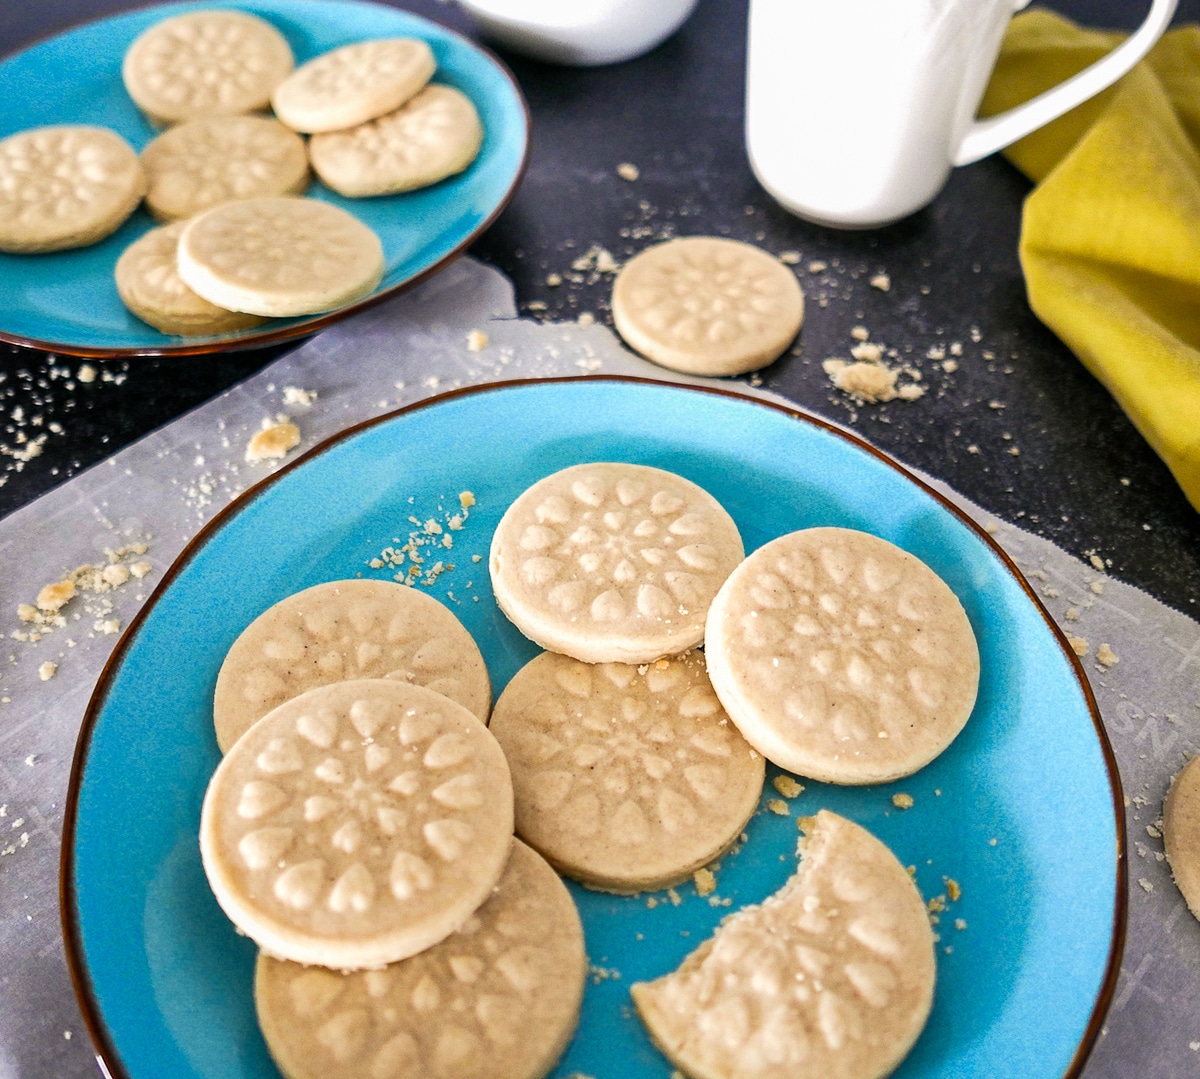 Cookies arranged on two blue plates with parchment and crumbs scattered around.